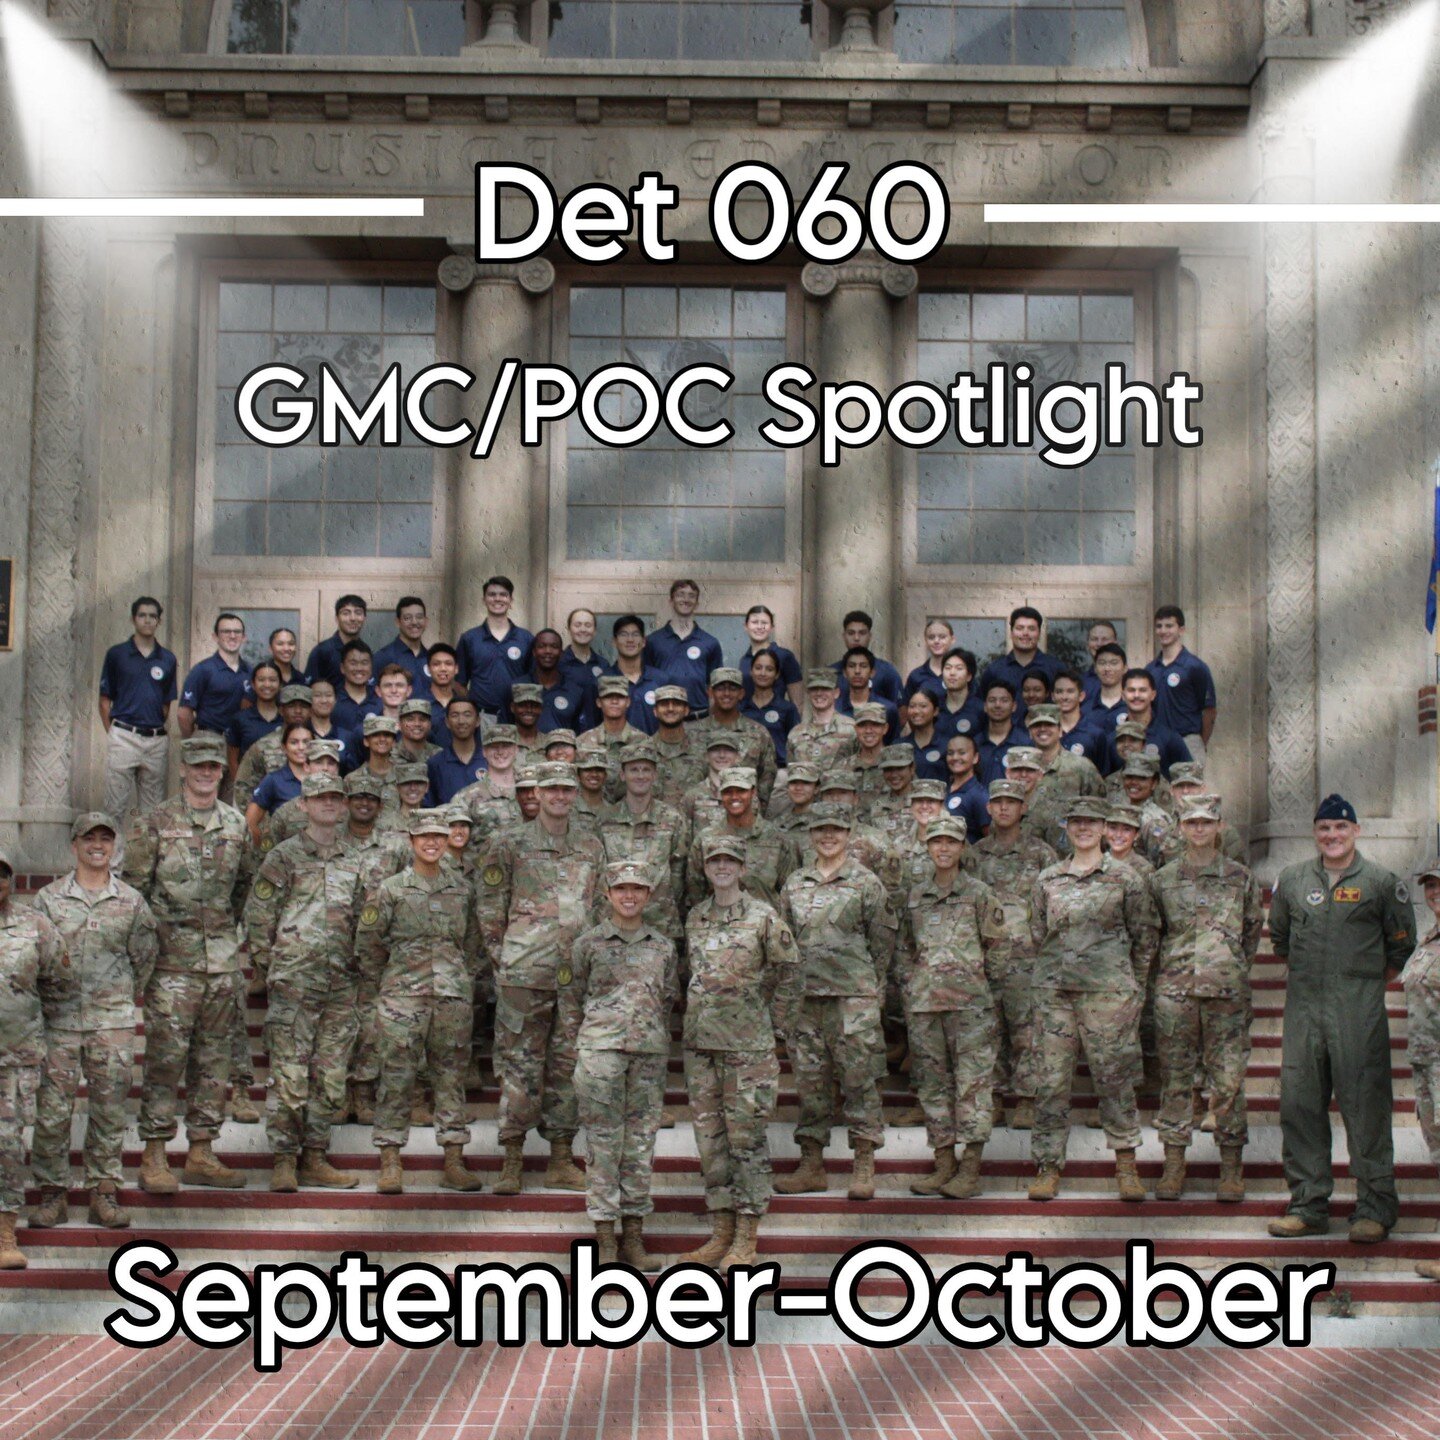 Shining the spotlight on our incredible GMC/POC of the Month for October and September in Detachment 060! 🌟 

𝘾/𝙂𝙖𝙧𝙧𝙞𝙜𝙖𝙣:

𝙃𝙤𝙬 𝙙𝙤 𝙮𝙤𝙪 𝙛𝙚𝙚𝙡 𝙖𝙗𝙤𝙪𝙩 𝙧𝙚𝙘𝙚𝙞𝙫𝙞𝙣𝙜 𝙋𝙊𝘾/𝙂𝙈𝘾 𝙤𝙛 𝙩𝙝𝙚 𝙢𝙤𝙣𝙩𝙝?
I&rsquo;m very thankf